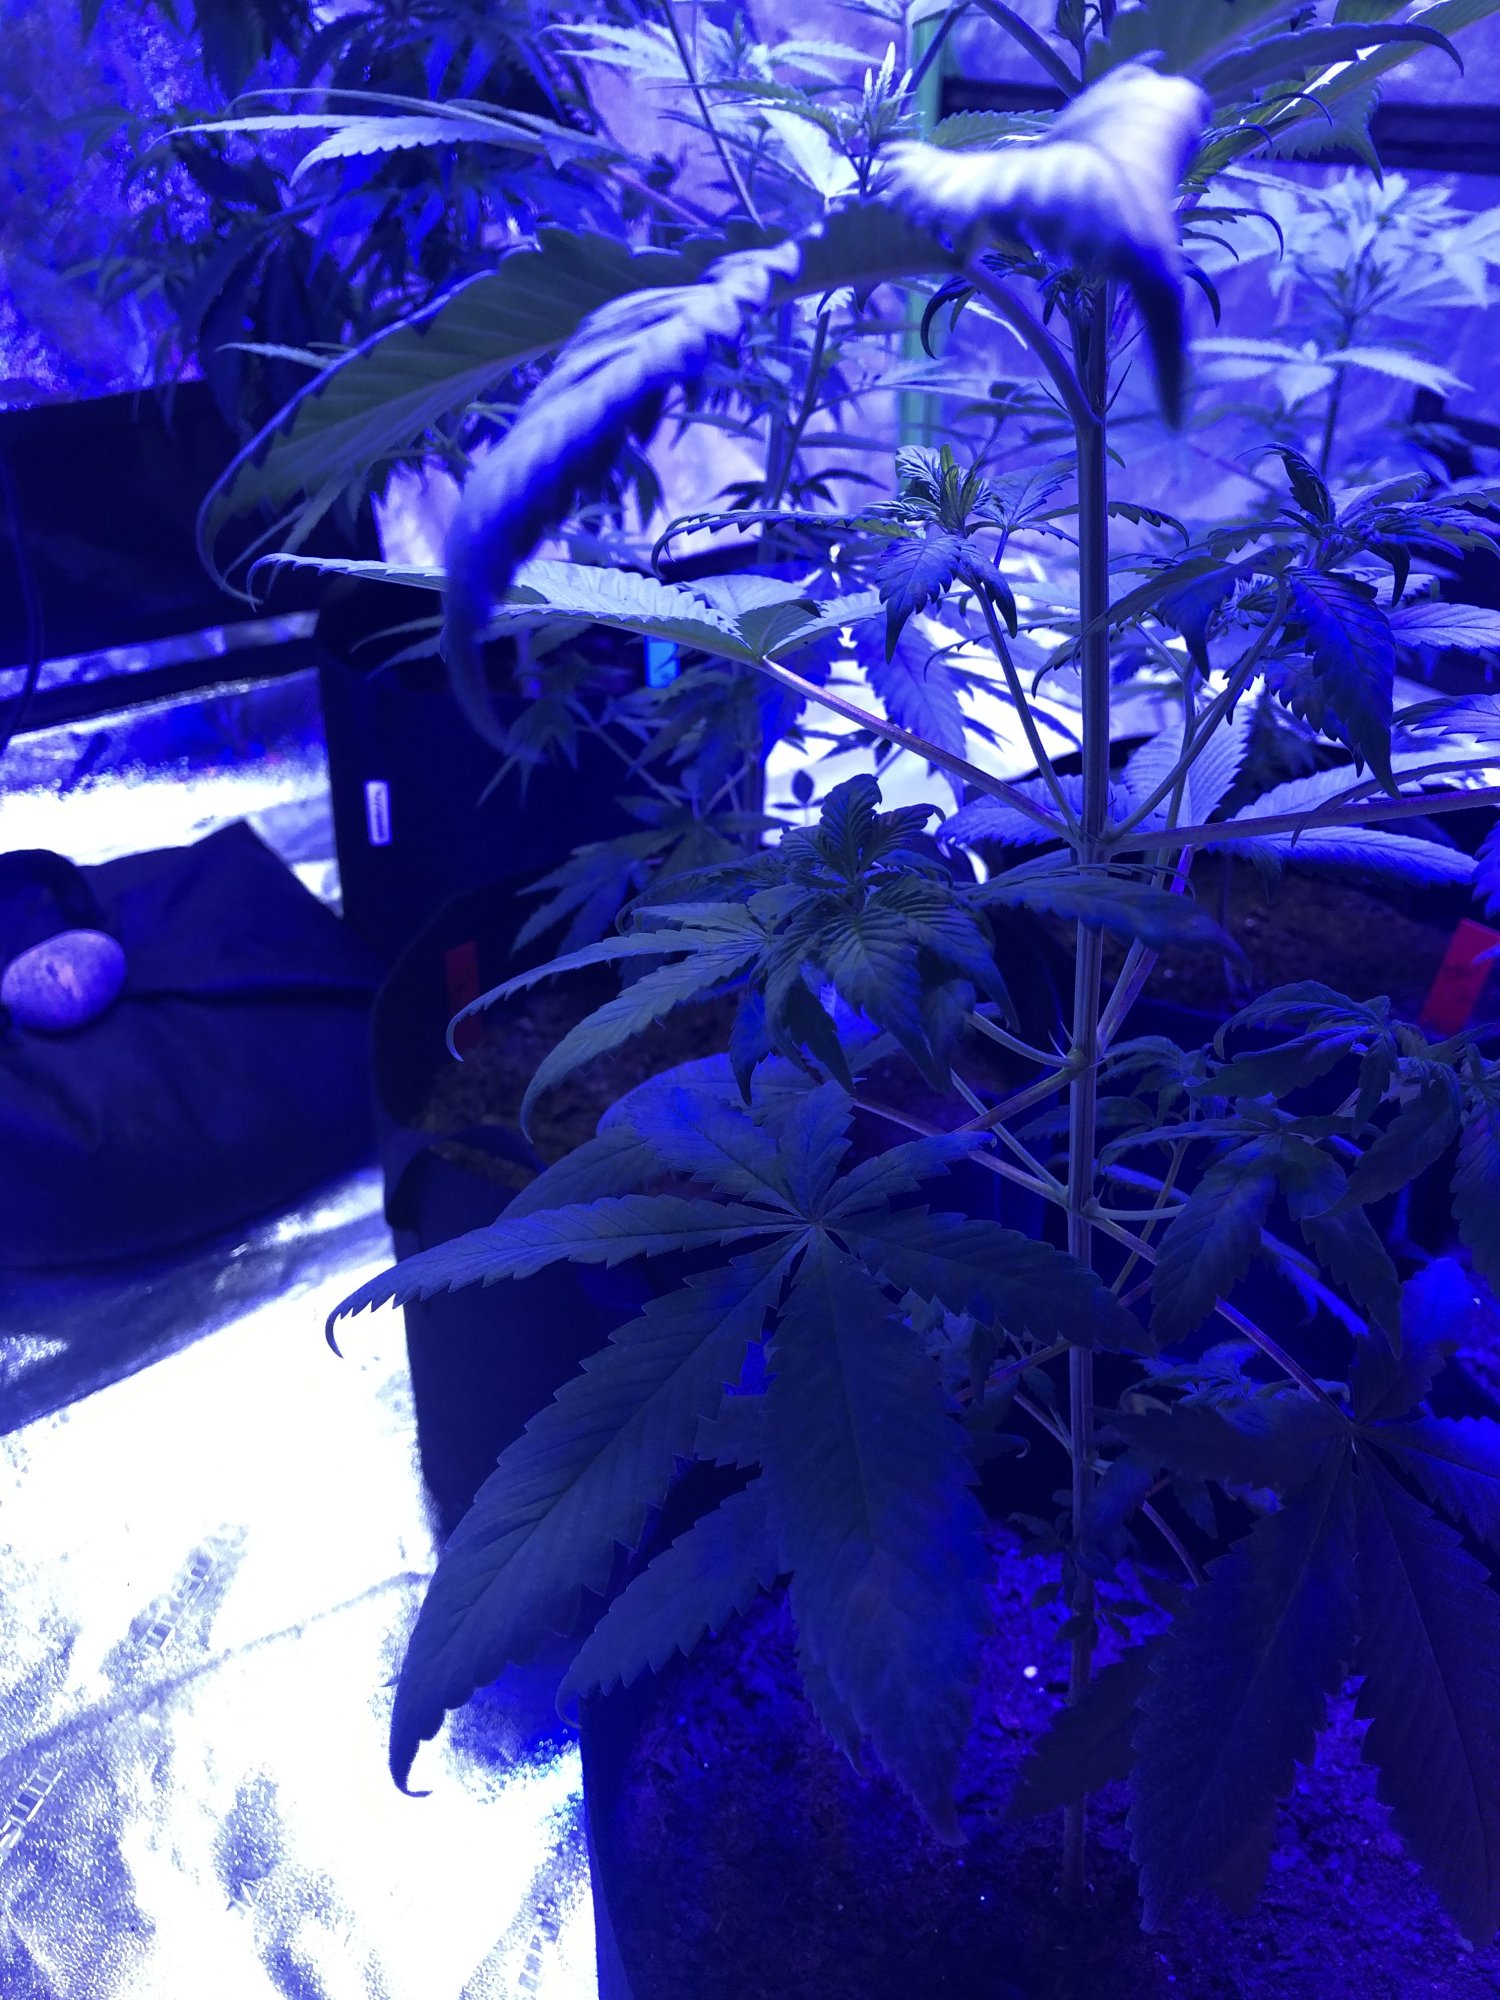 Cloning and nute burn 5